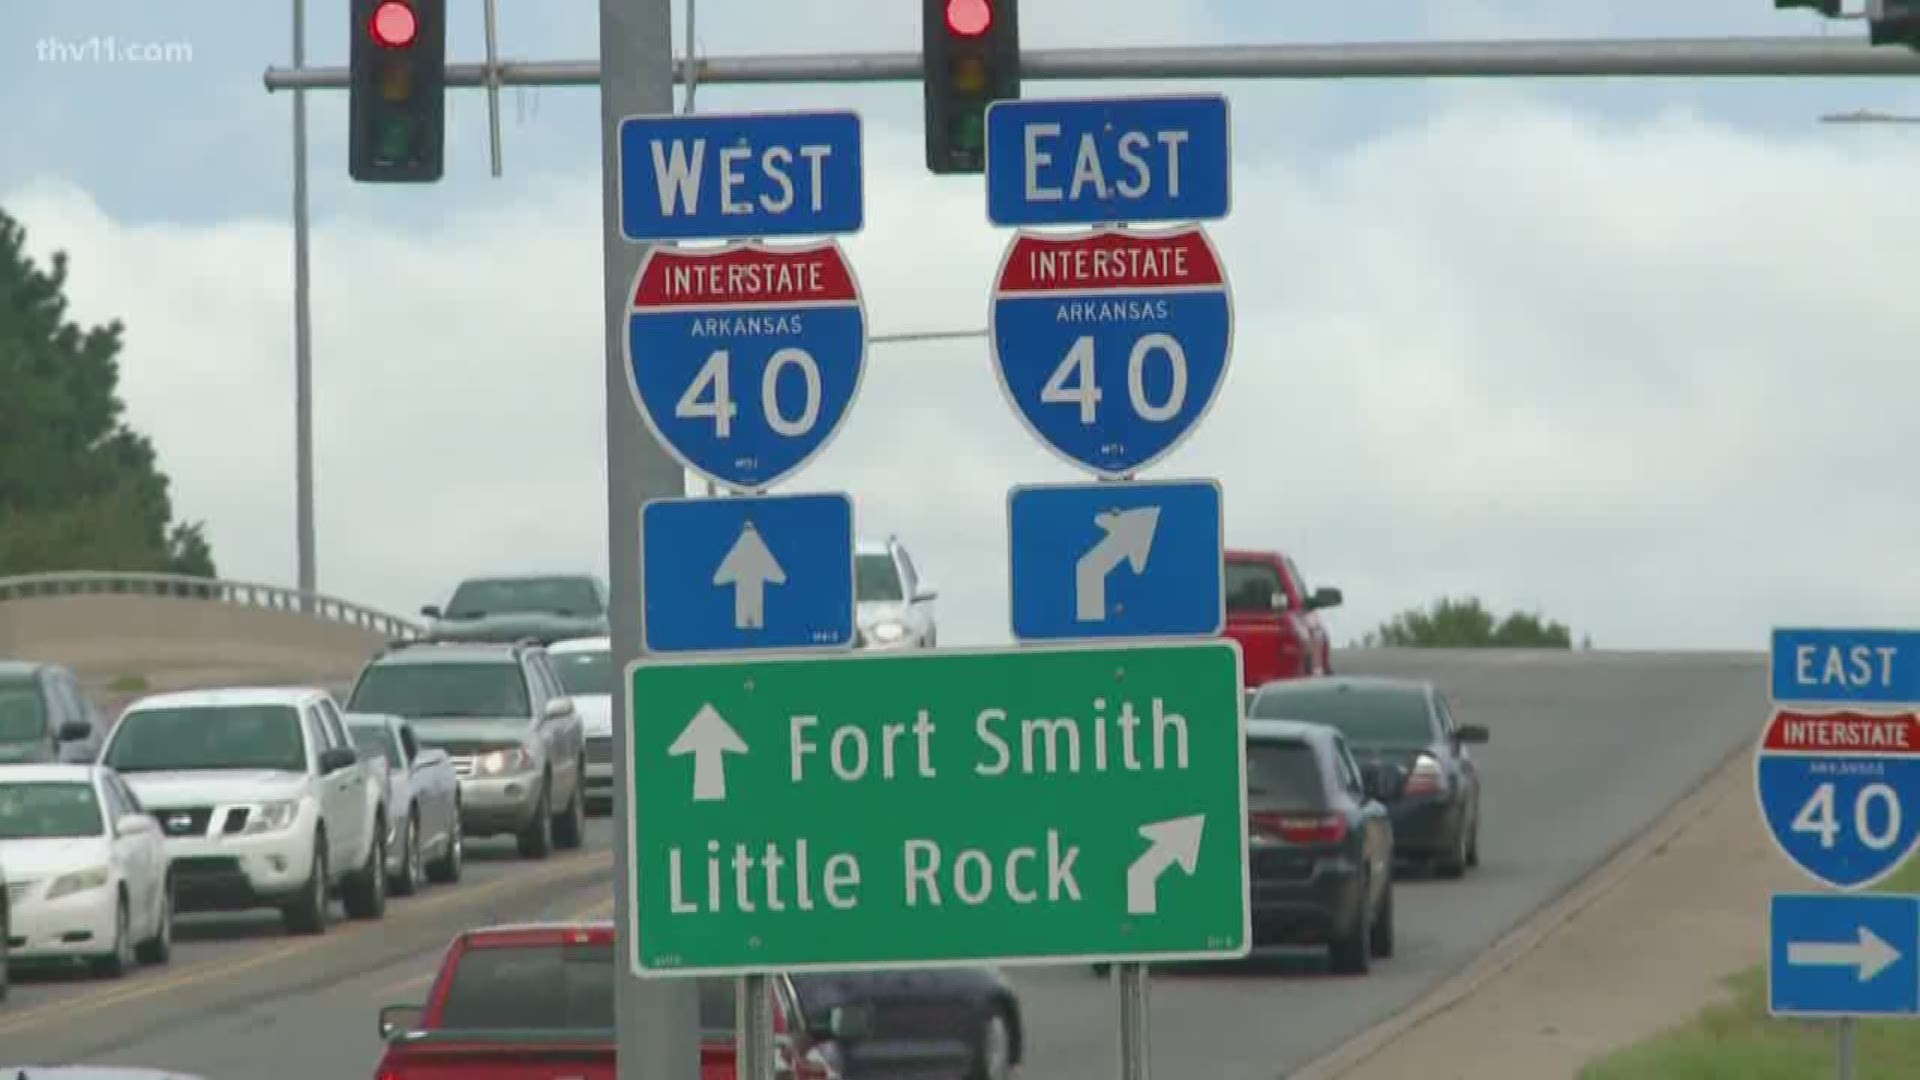 Conway is working hand-in-hand with AR-DOT to connect two of the busiest highways in town.